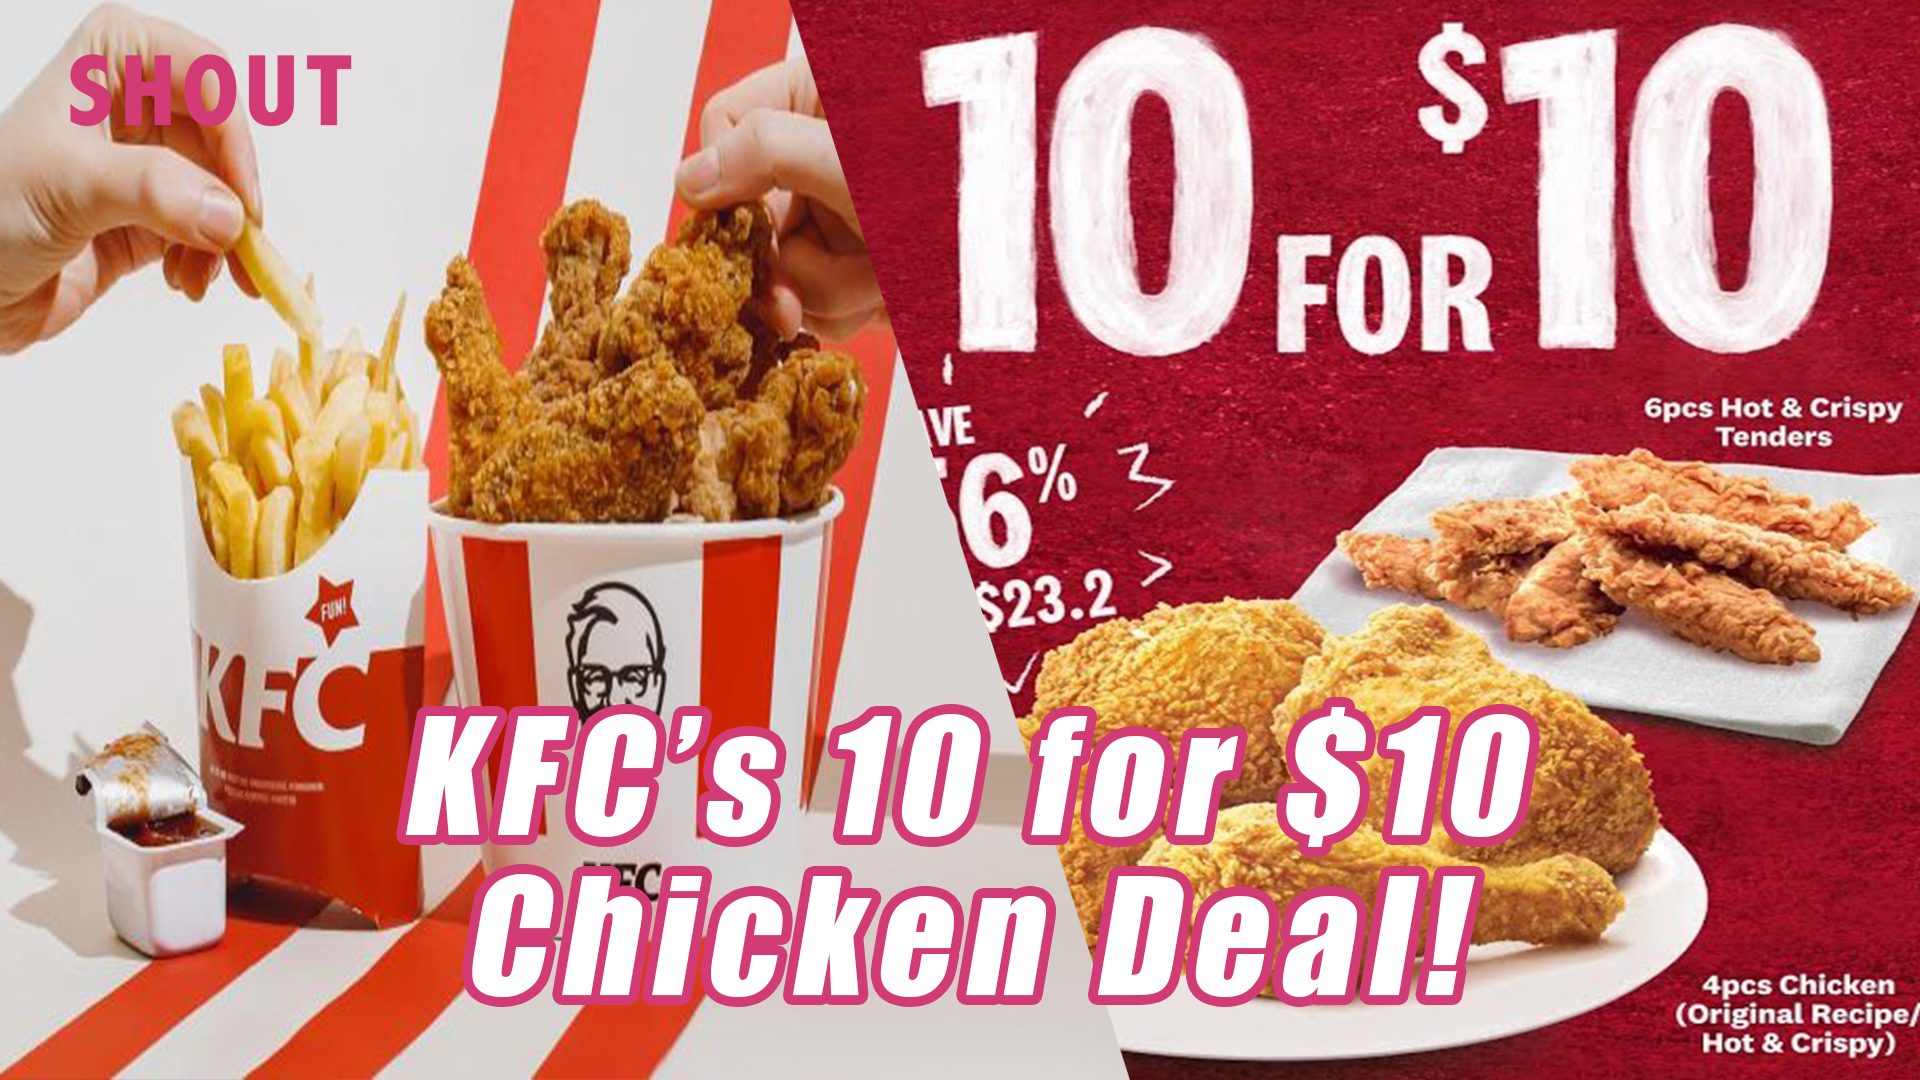 Kfcs For Chicken Deal Shout